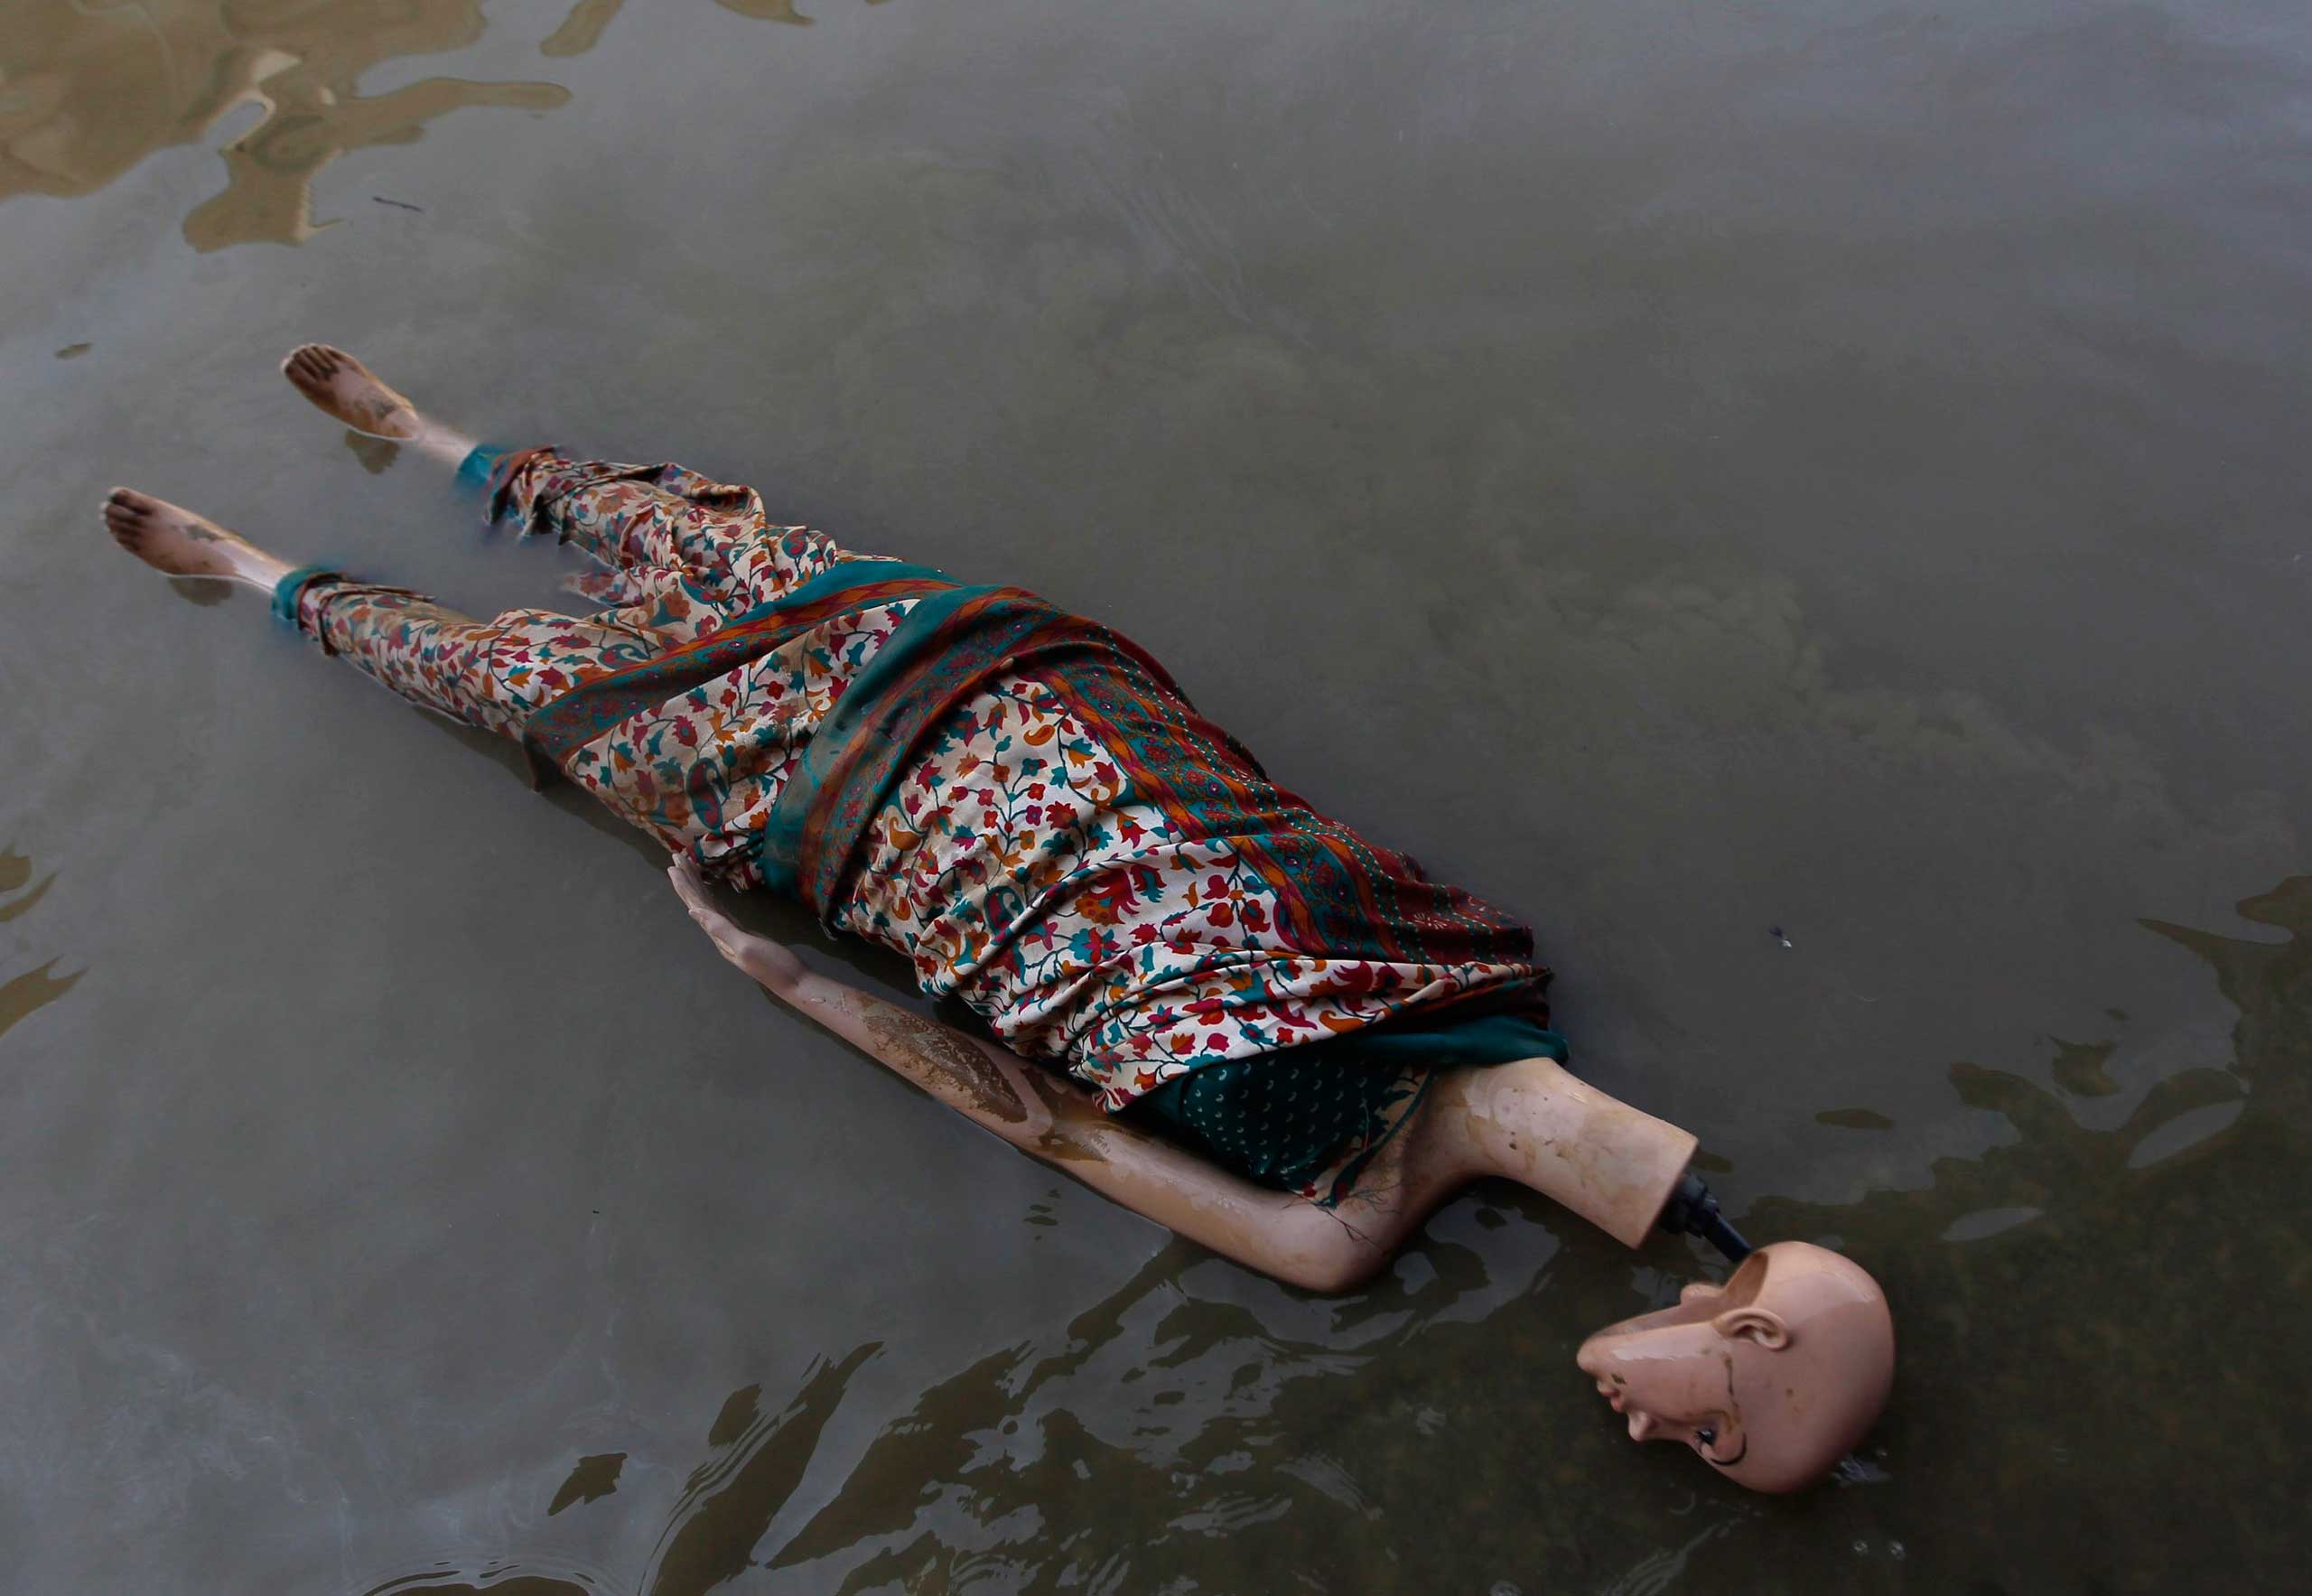 Sept. 16, 2014. A mannequin floats in the floodwaters along a street in Srinagar, India.